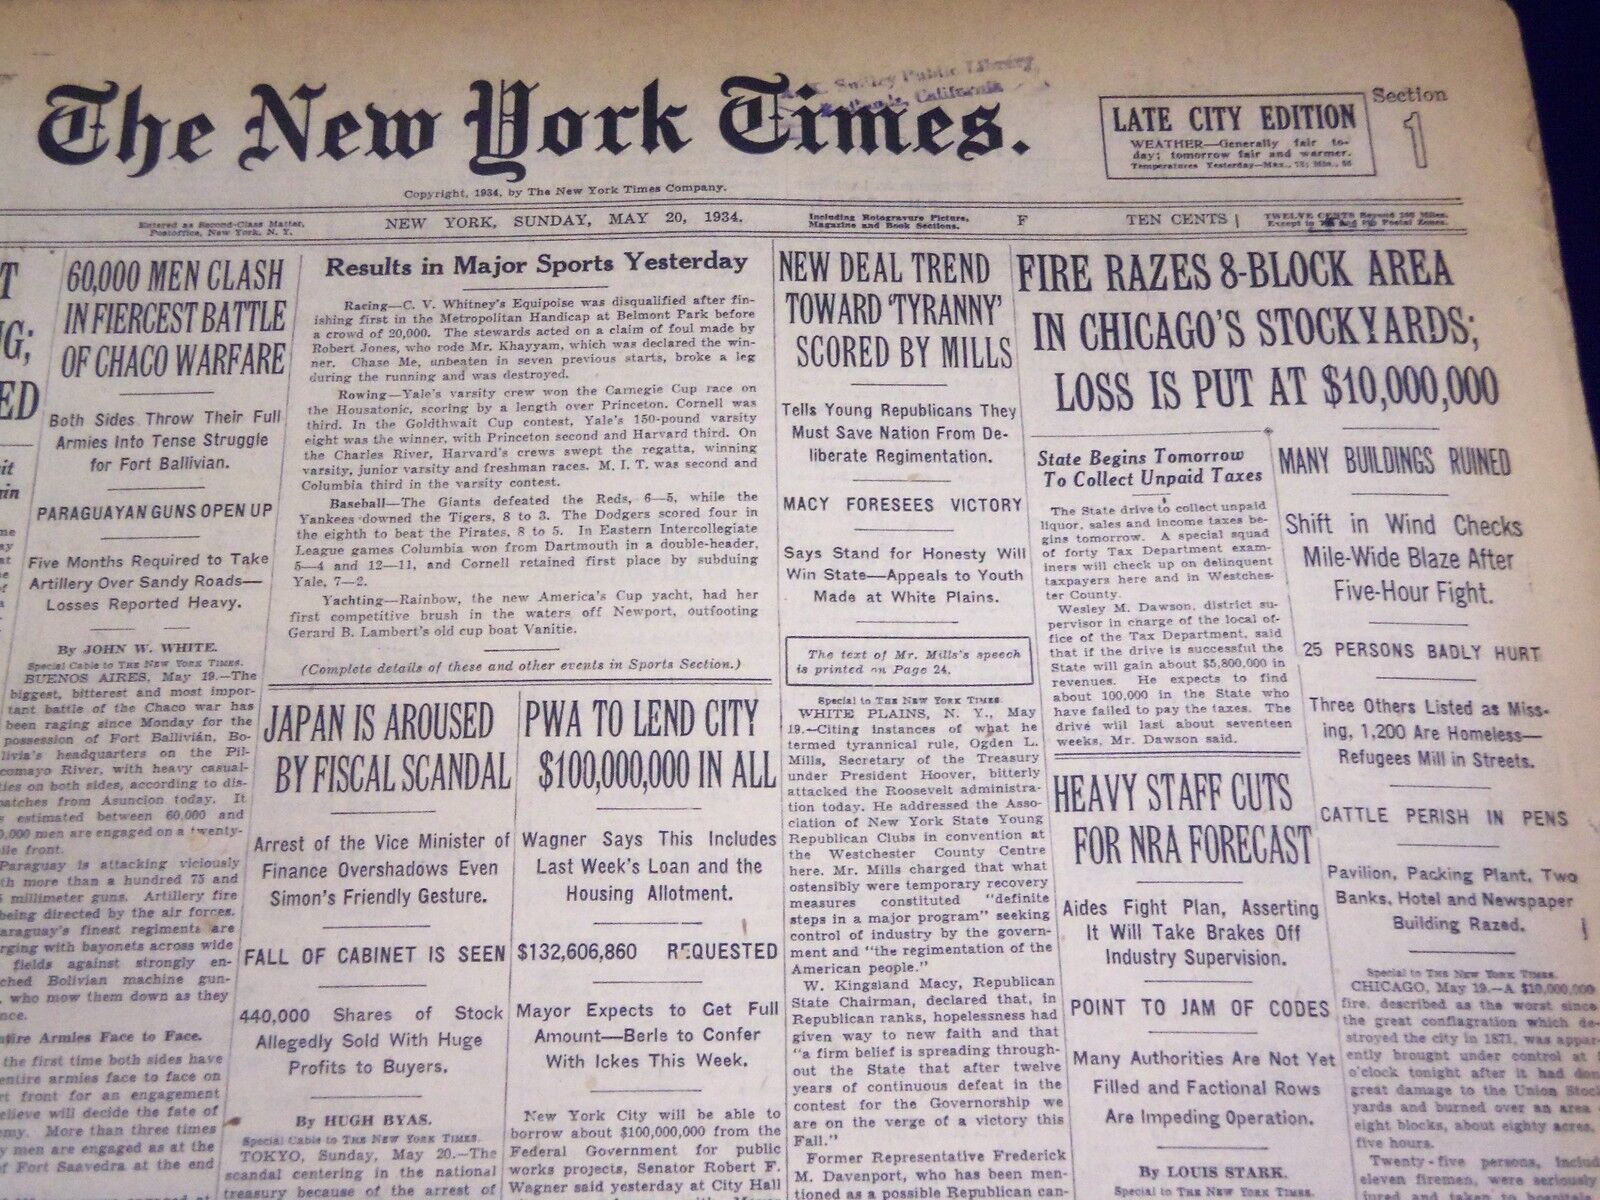 1934 MAY 20 NEW YORK TIMES - CHICAGO STOCKYARDS FIRE - NT 3992